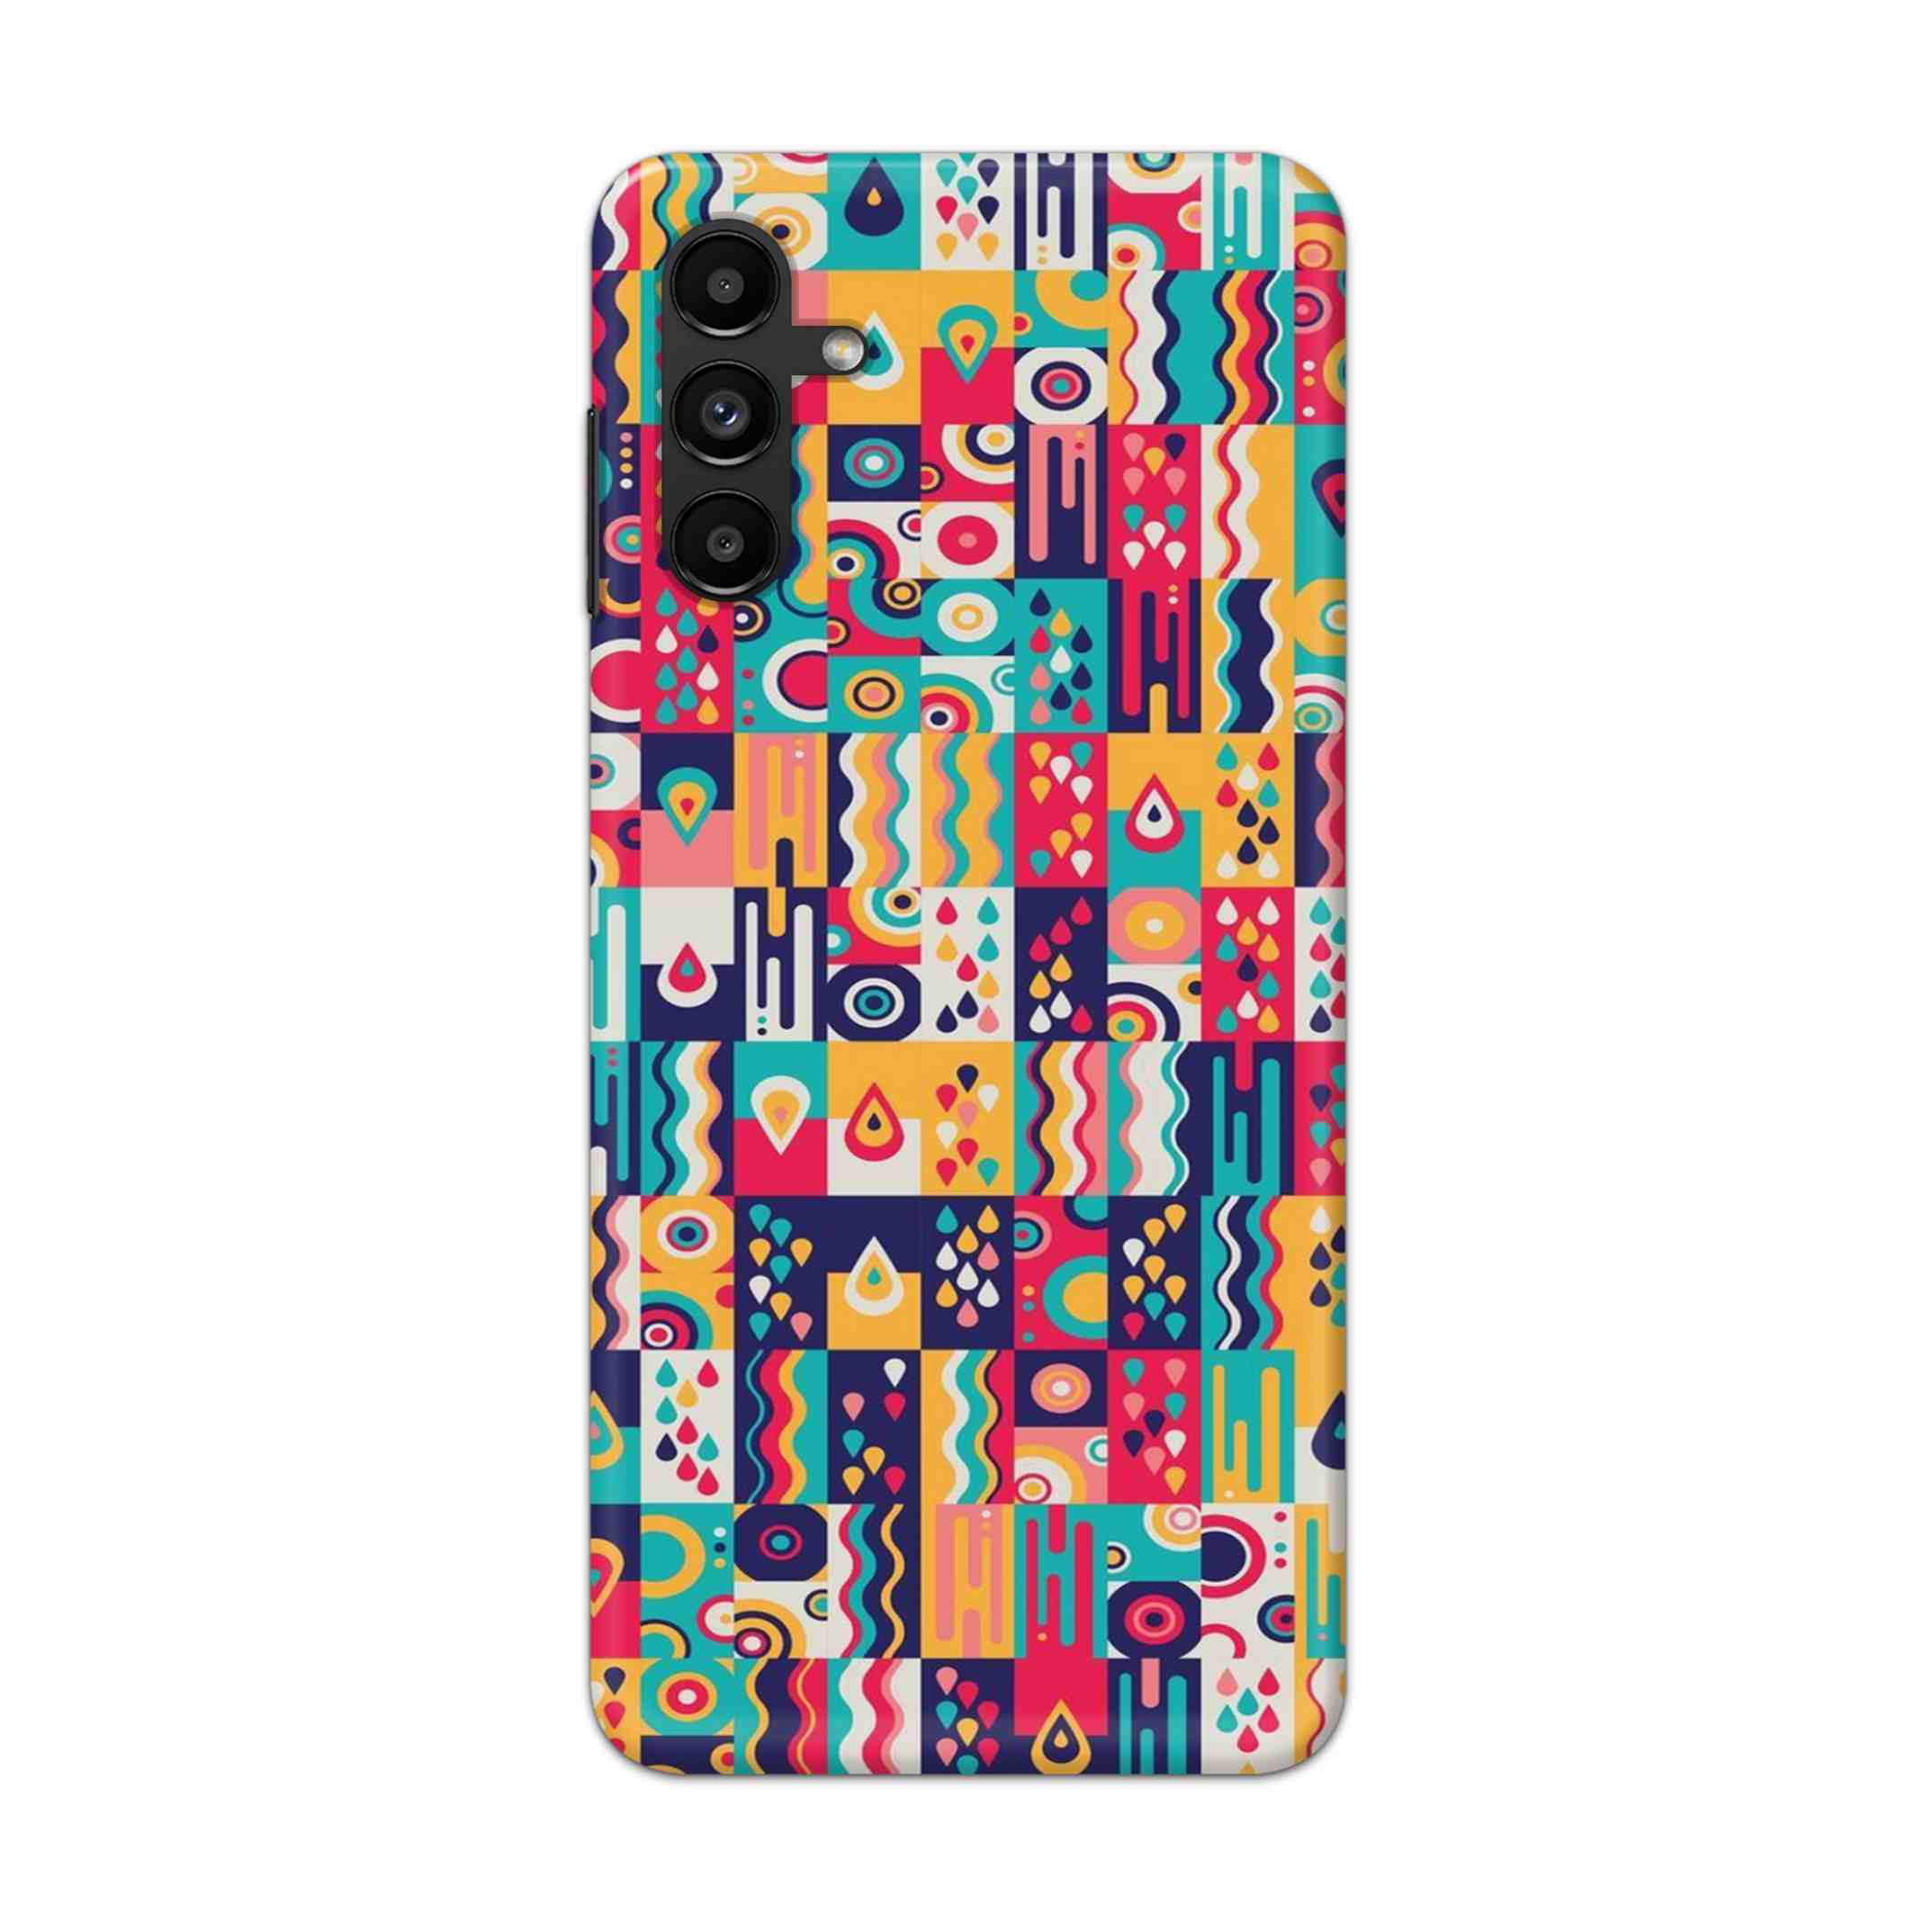 Buy Art Hard Back Mobile Phone Case/Cover For Galaxy A13 (5G) Online